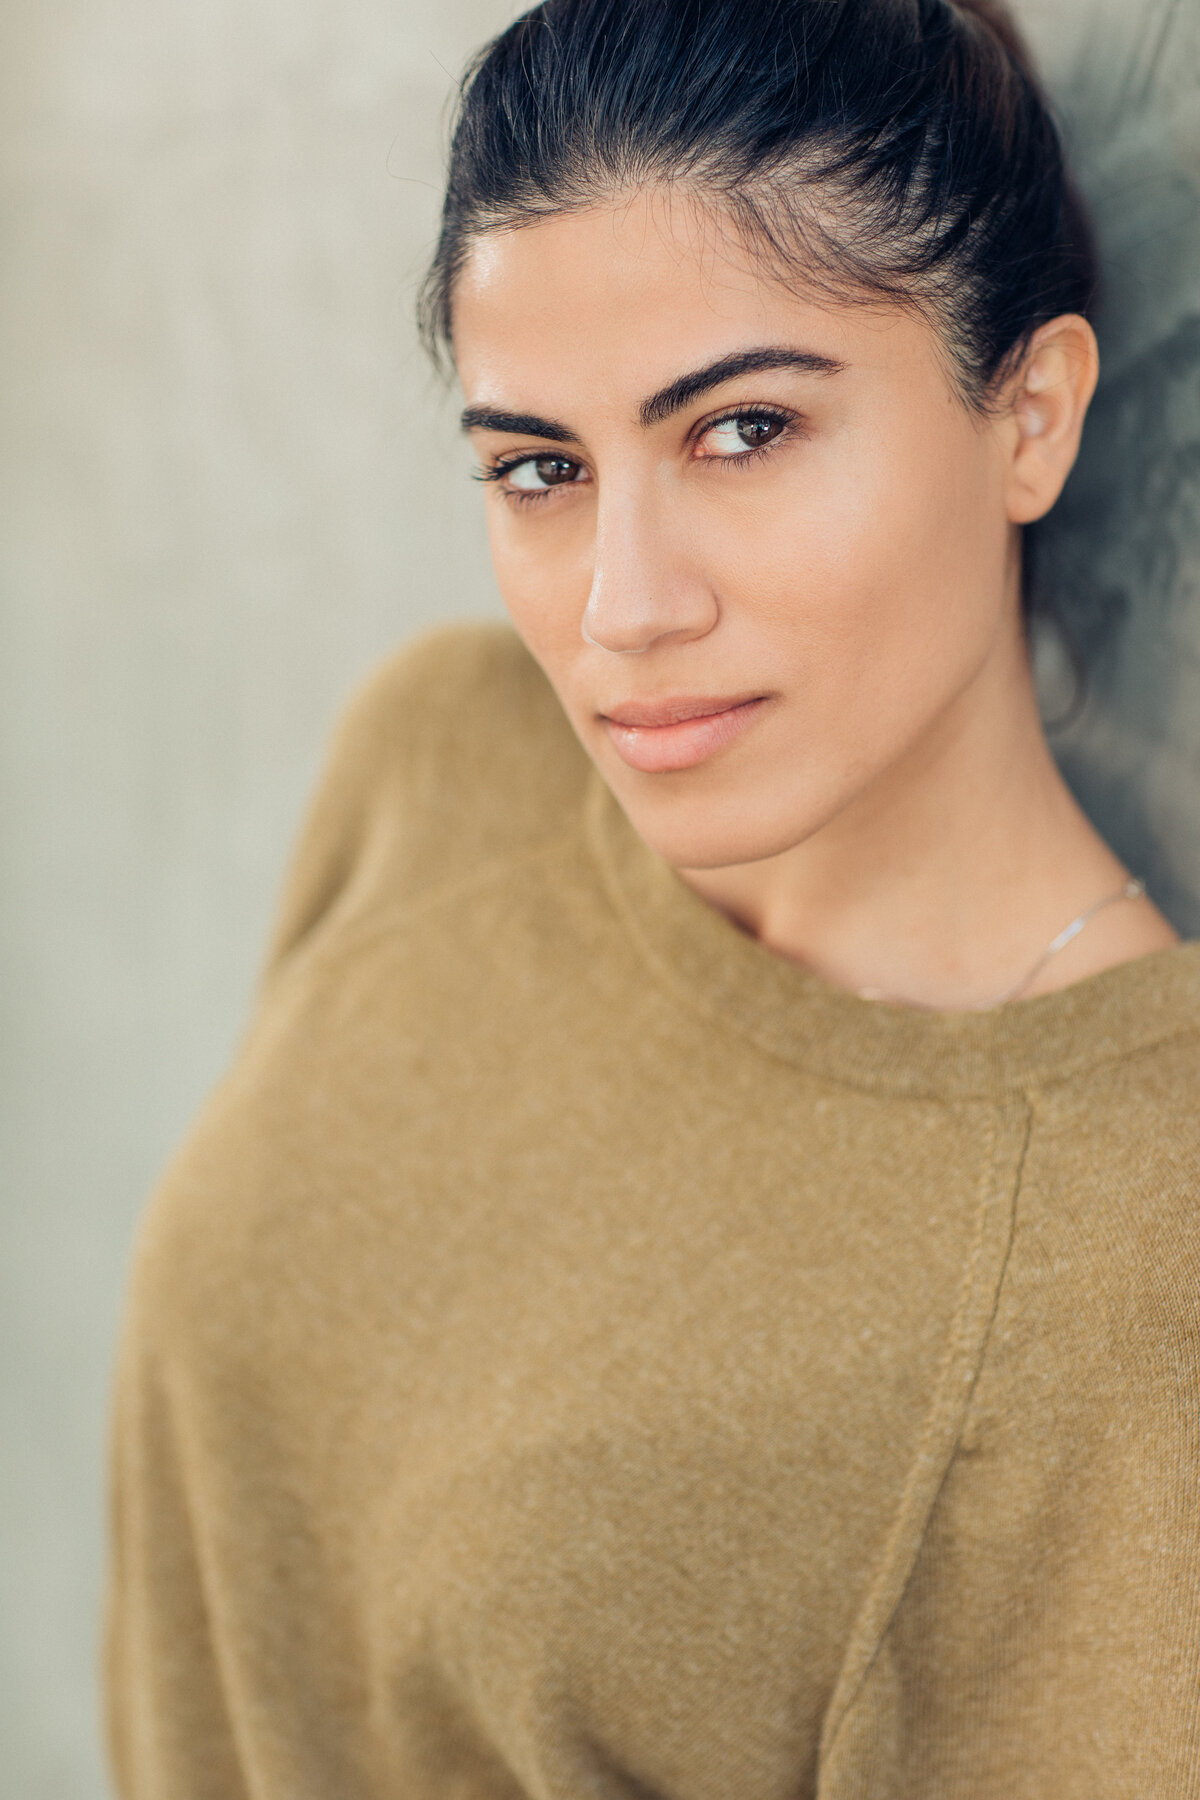 Headshot Photograph Of Young Woman In Green Sweater Los Angeles